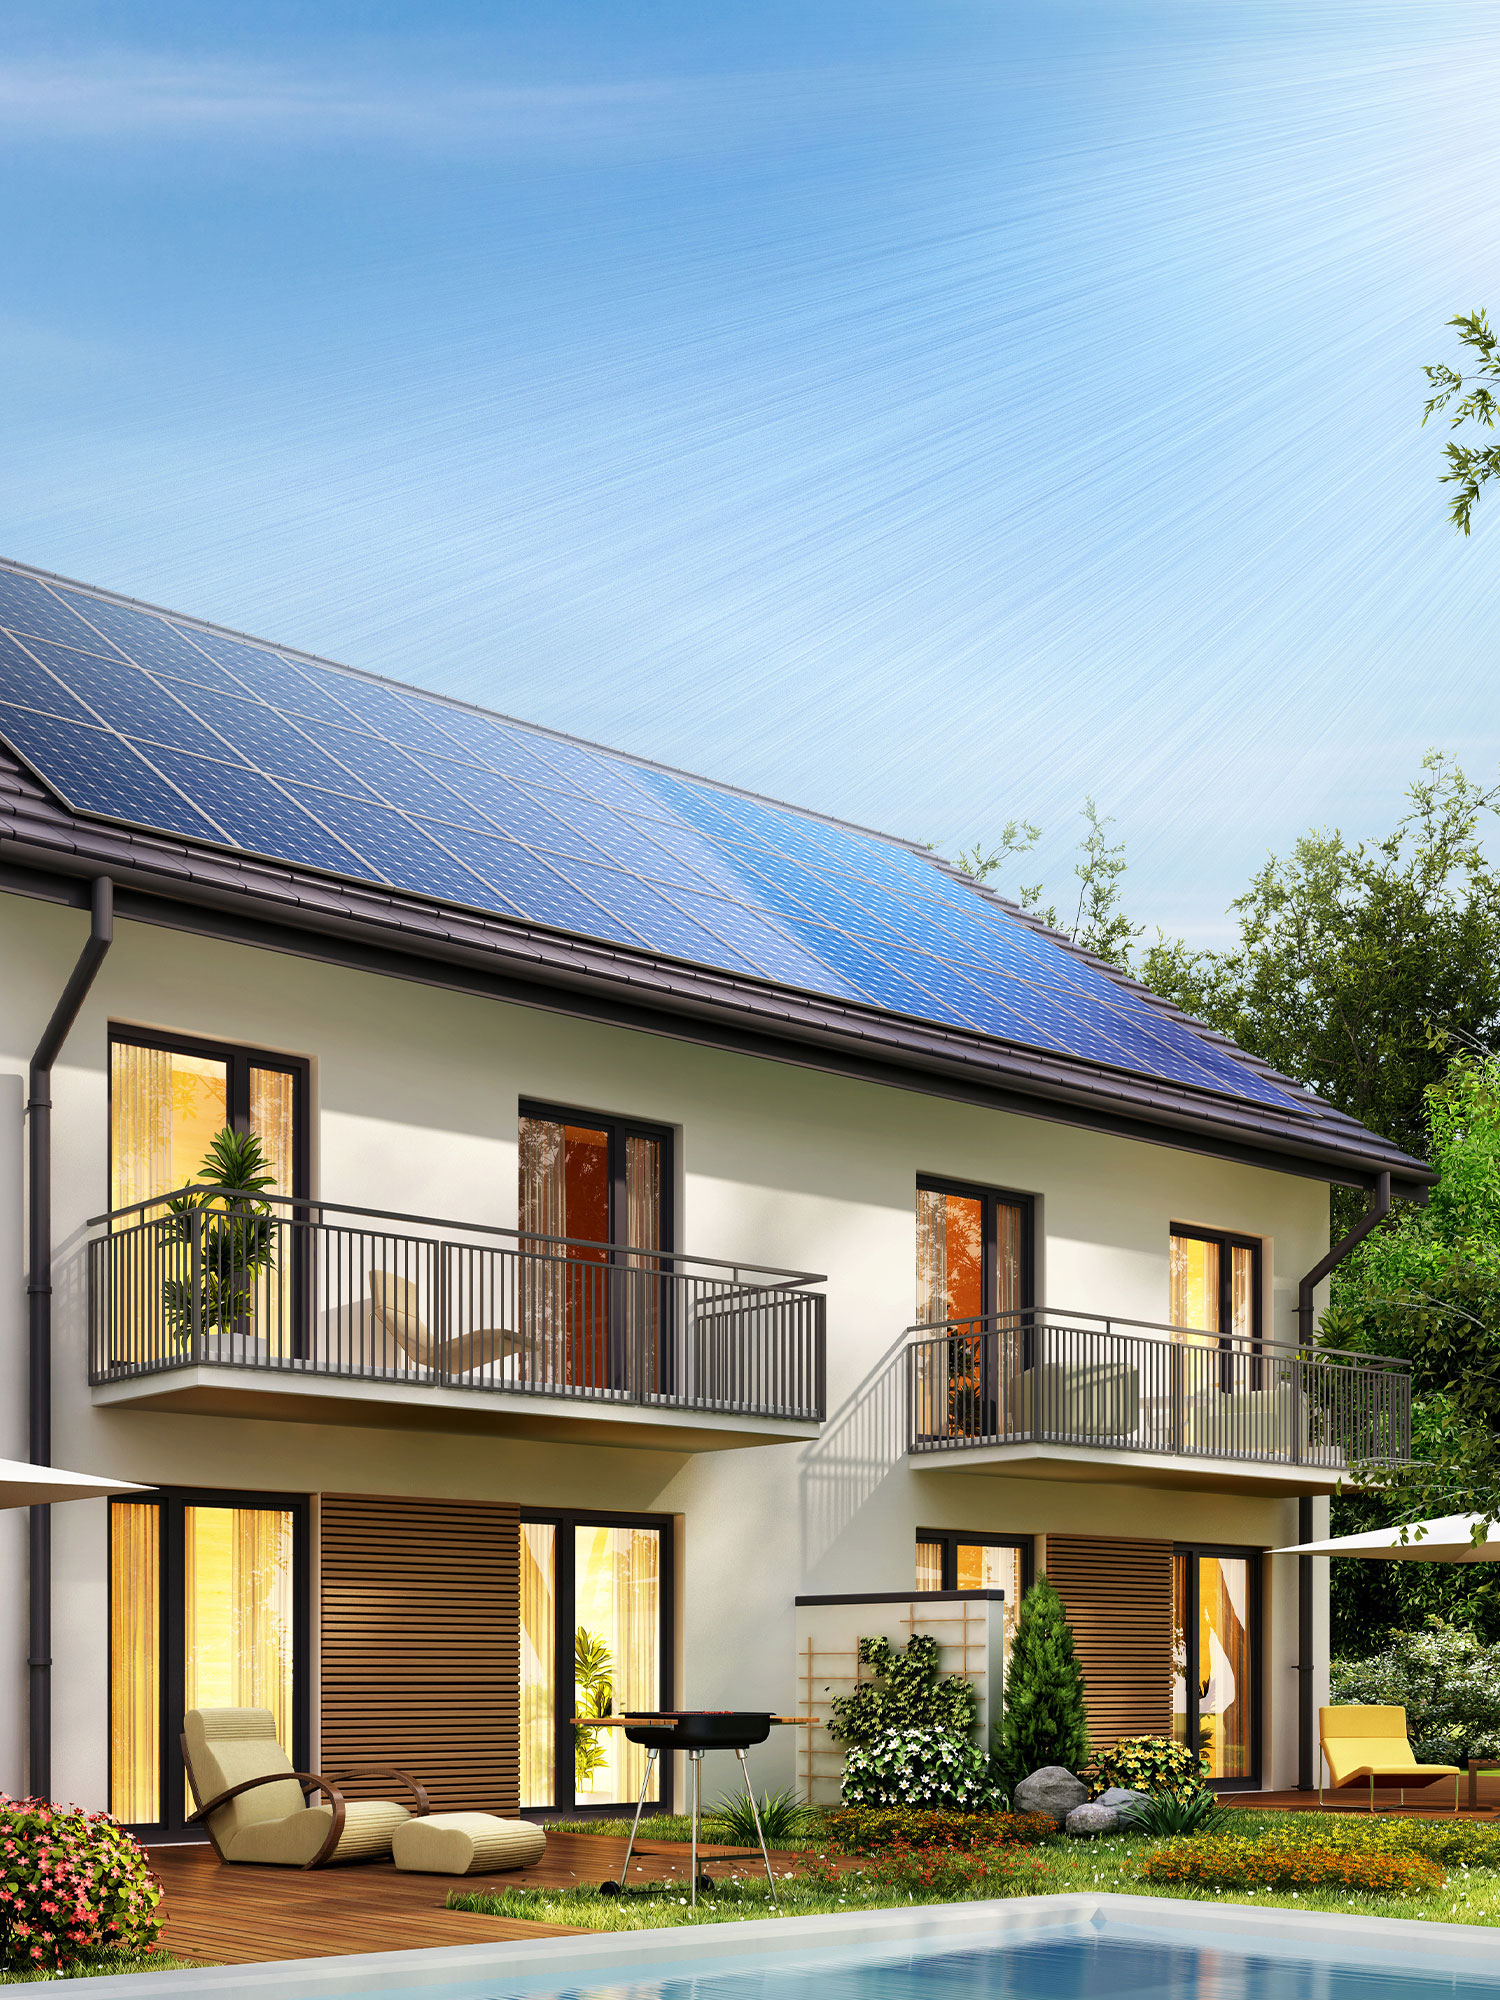 Energy independence for home in Layton is easy with SunPower by Custom Energy.